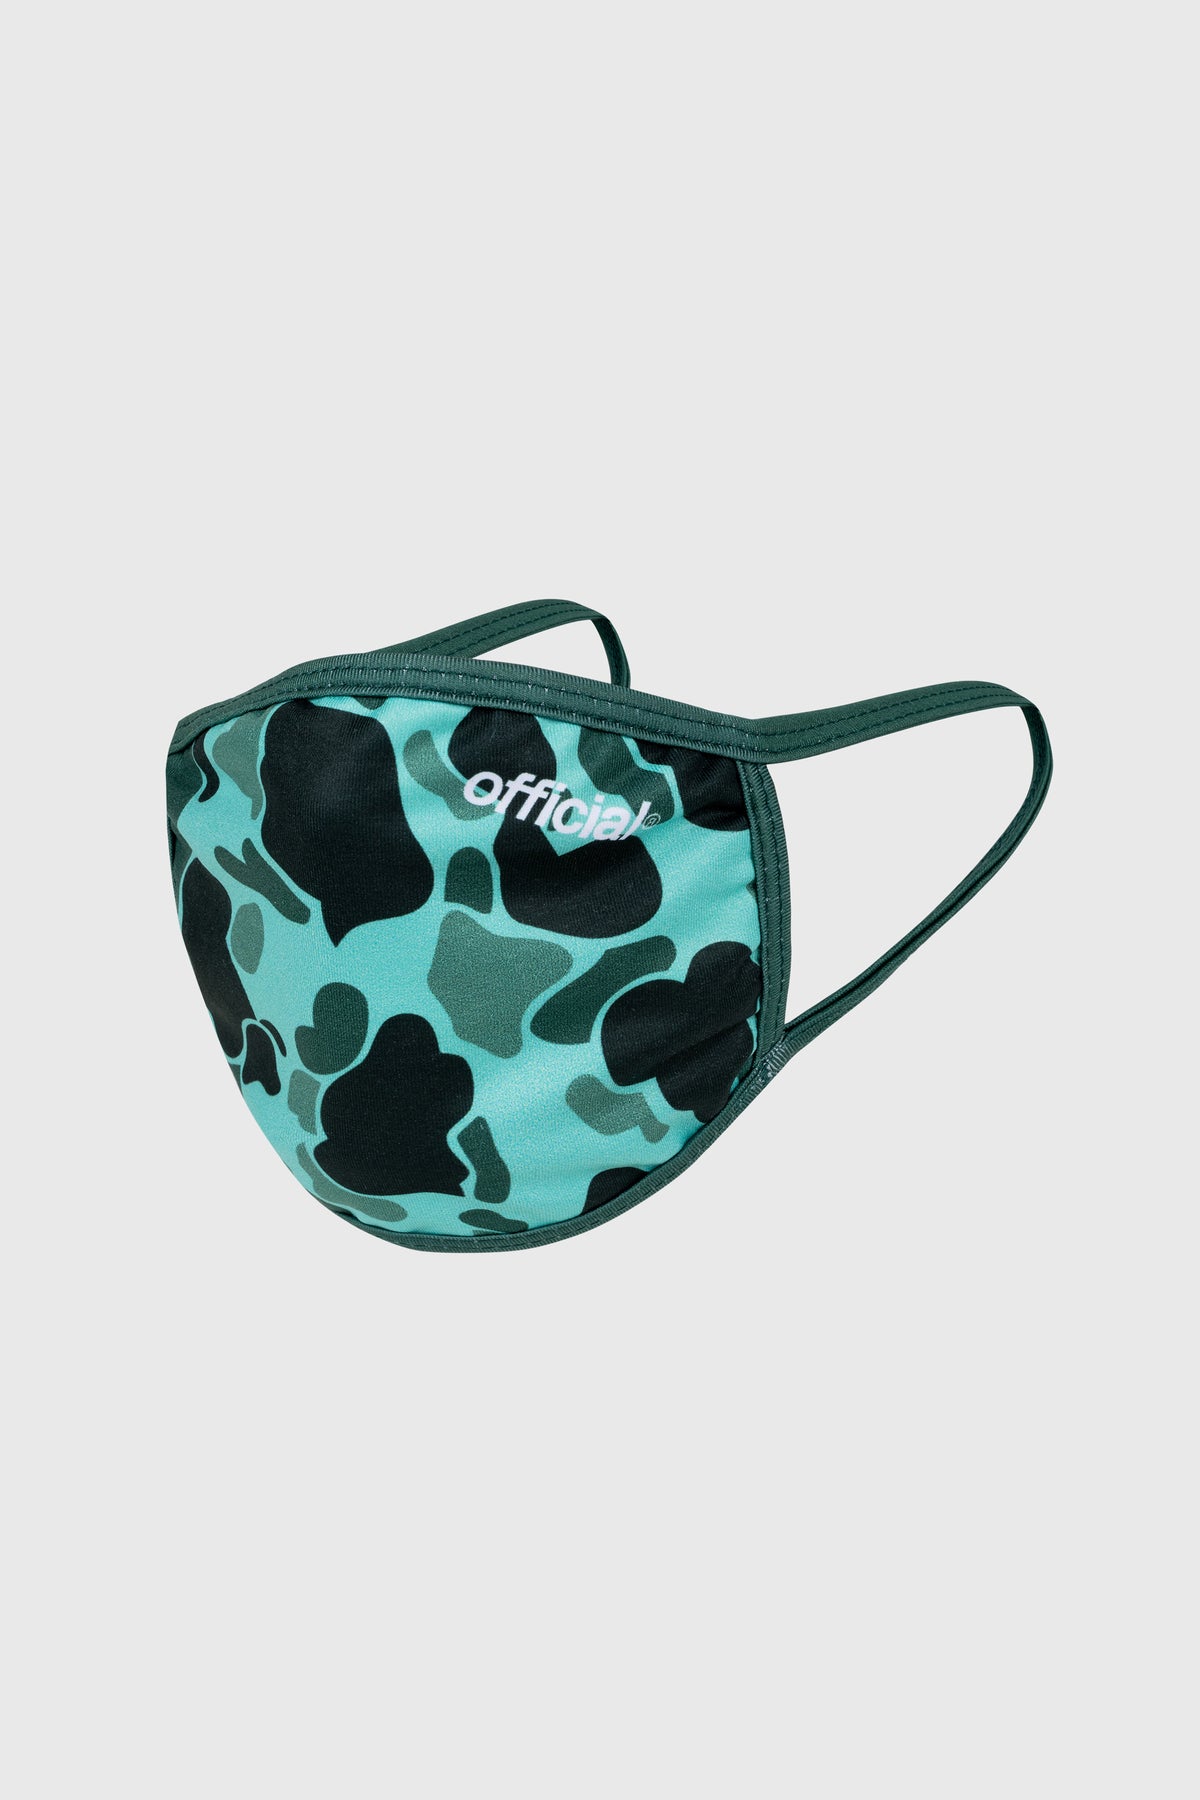 Duck Camo Face Mask (Green) by The Official Brand Green / L/XL